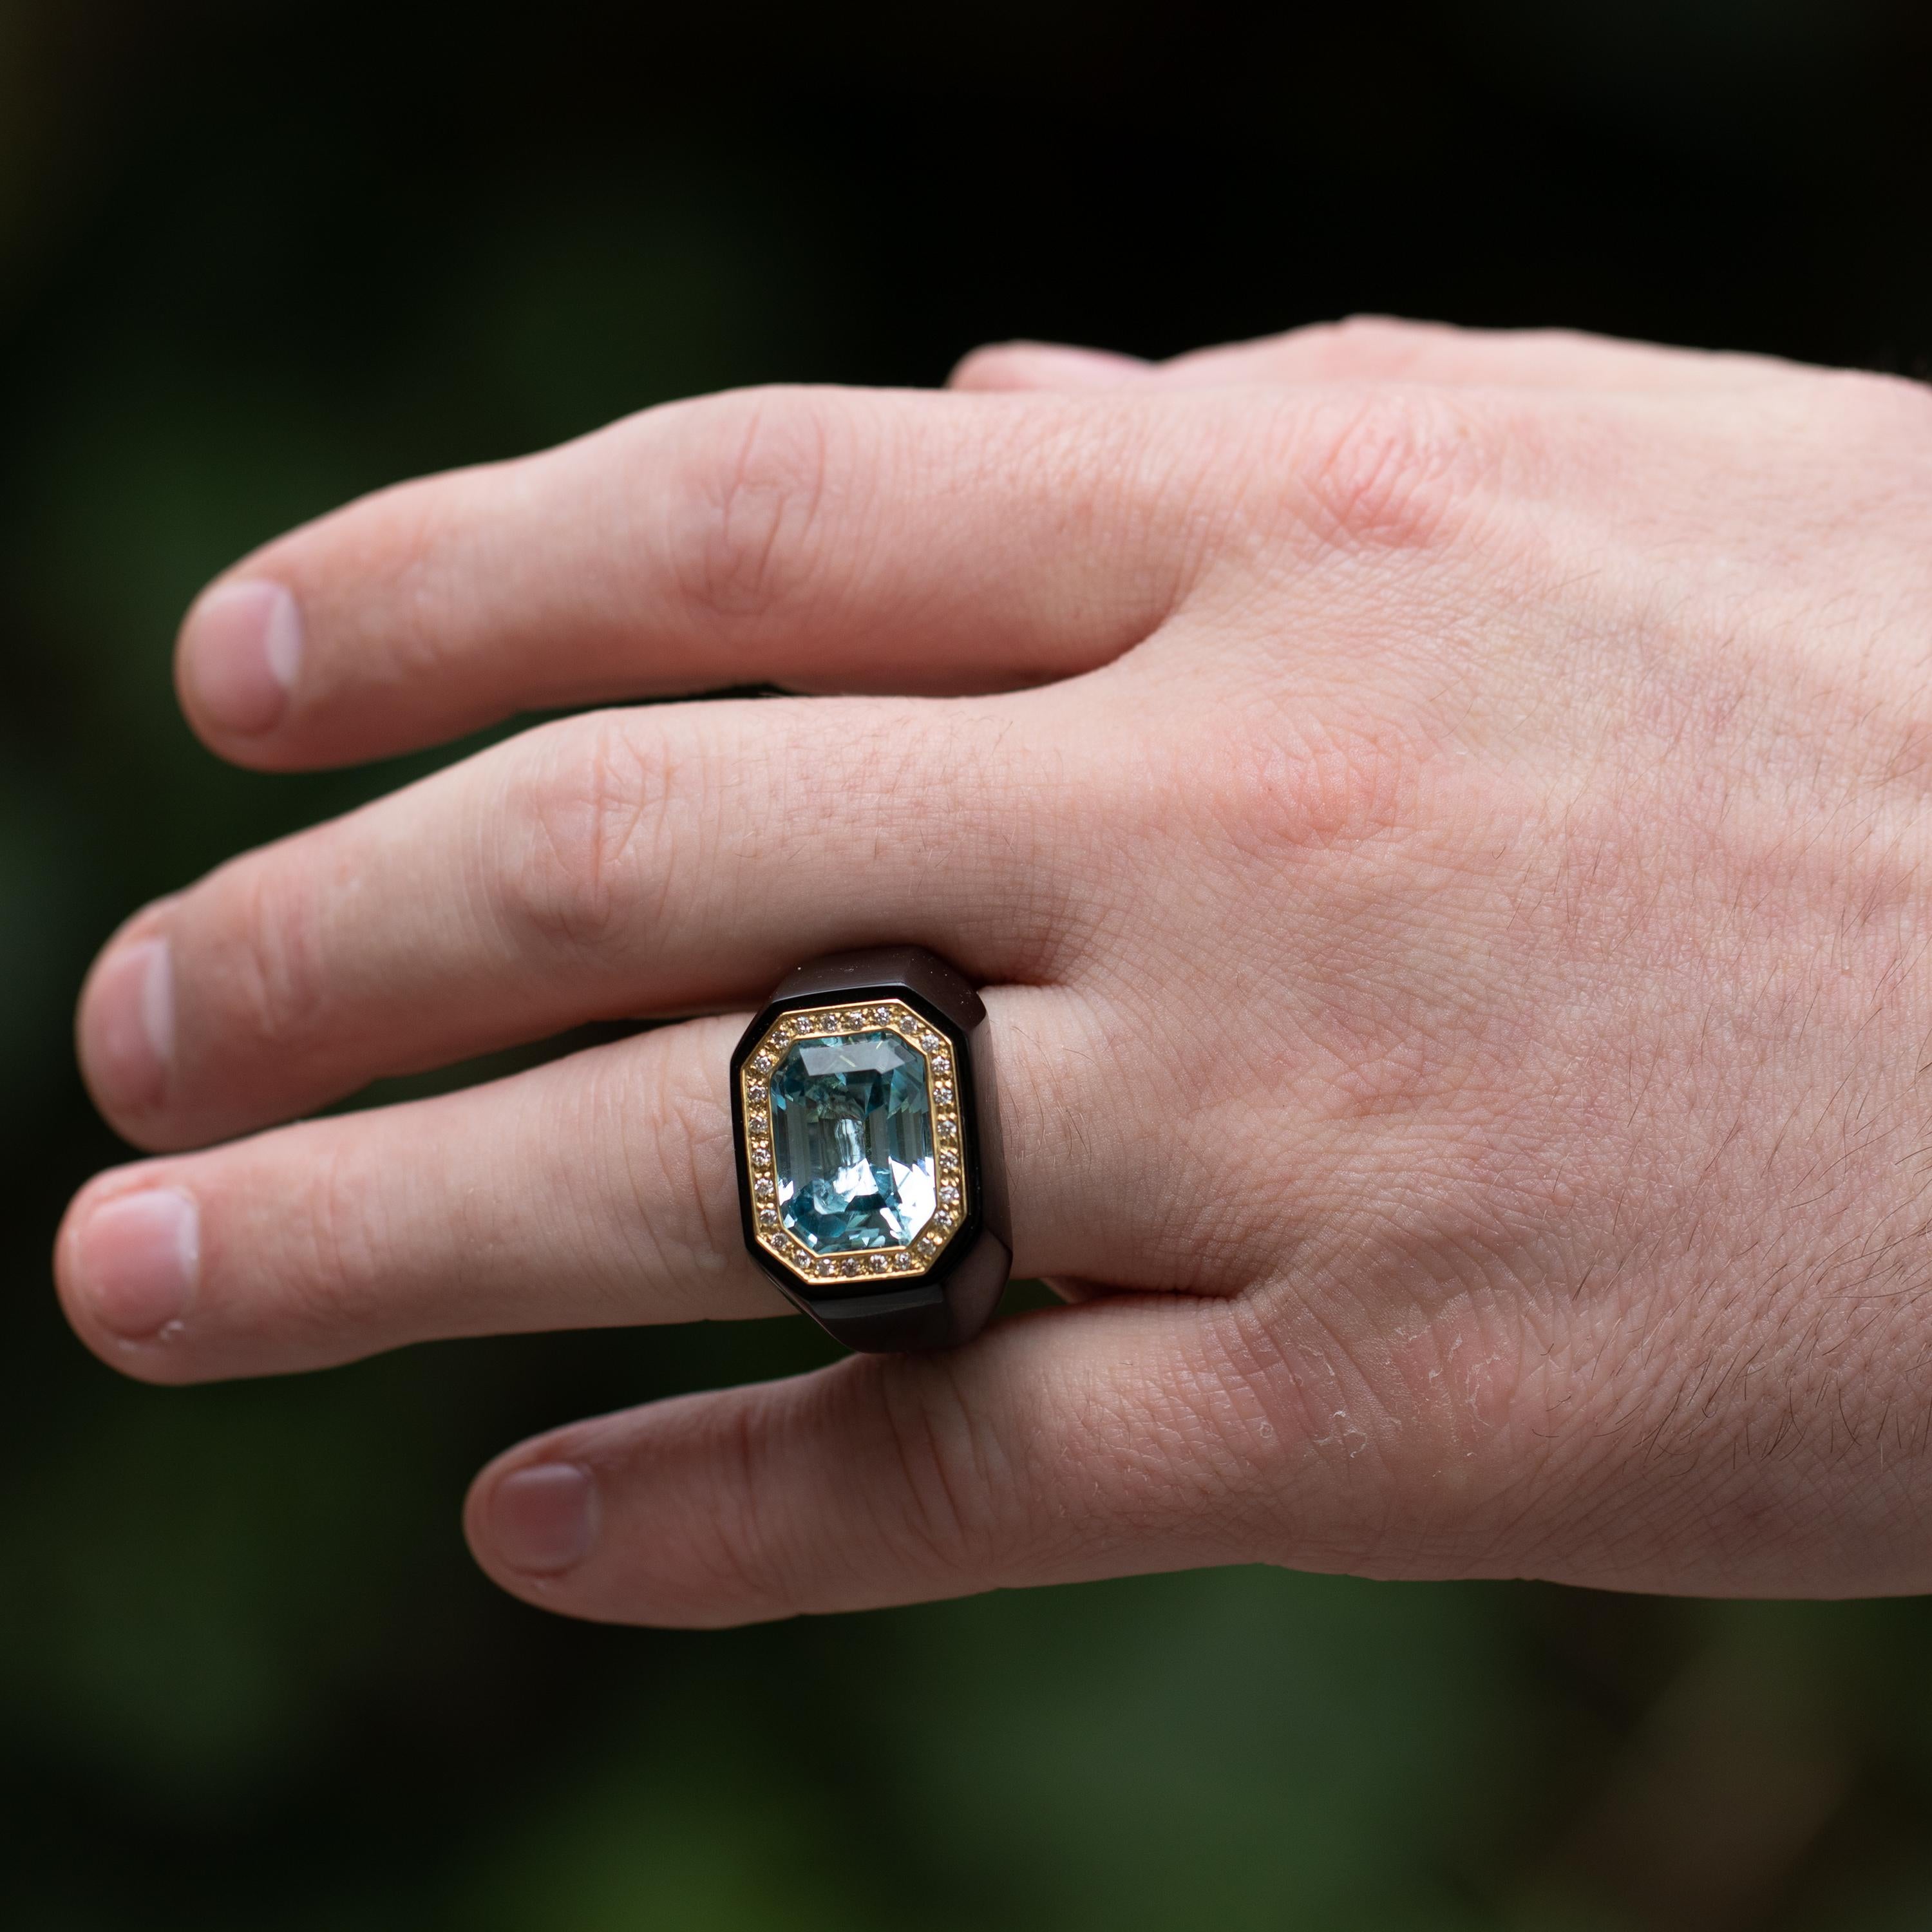 This Black Onyx Ring with a 10 Carat Aquamarine radiates True Luxury. Standing almost Half an Inch Tall, it's big, set at size 8.5, but it's also stunning, and very Elegant. 
Aquamarine = 10 carats
Diamonds = .66 carats
18K Yellow Gold
Gemstone: